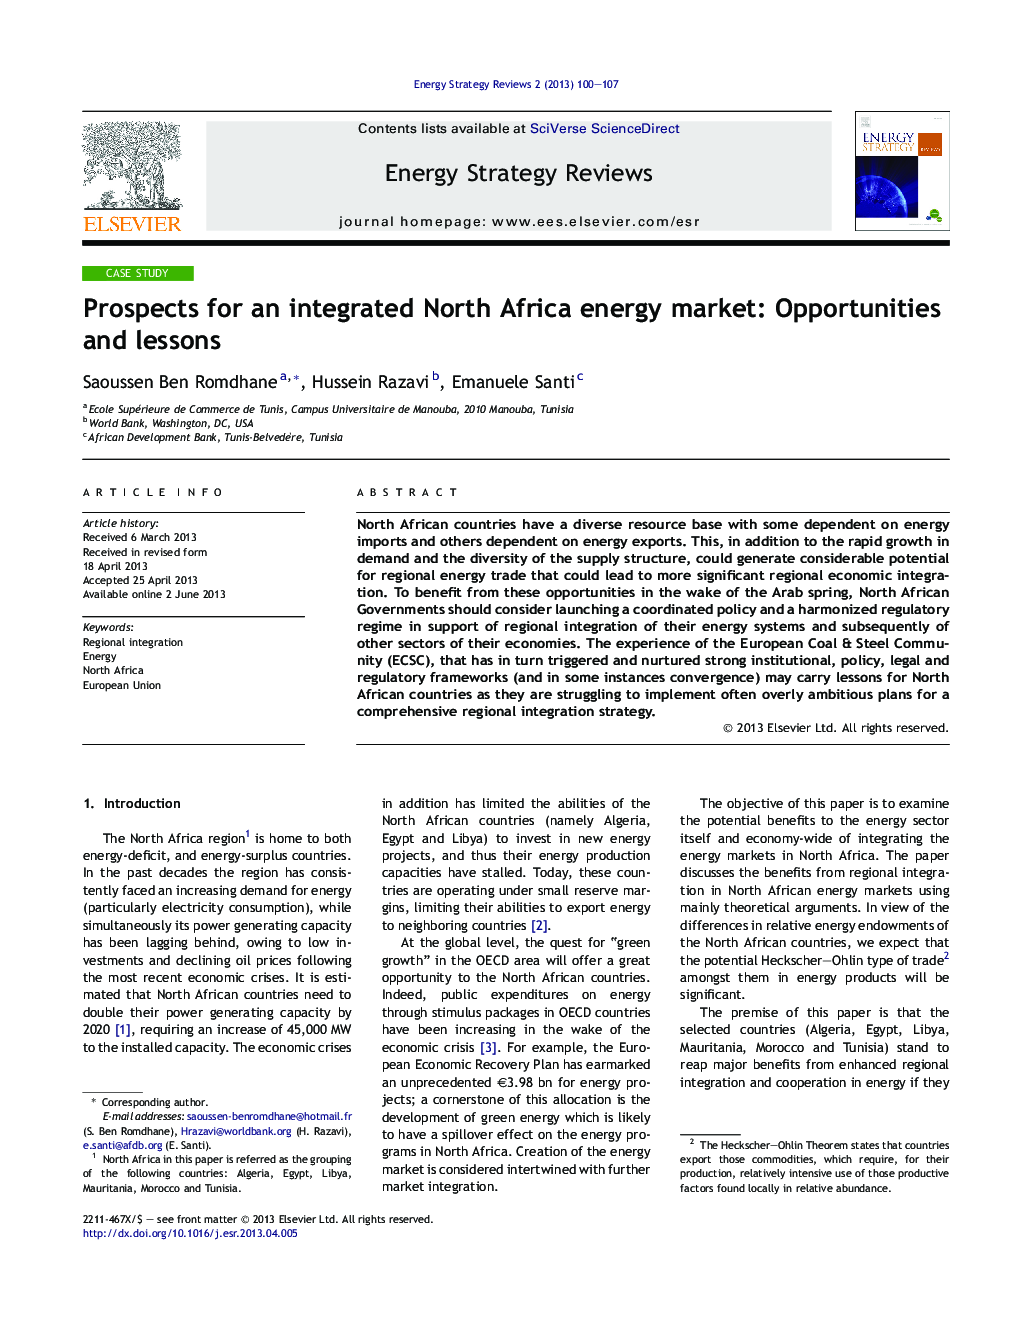 Prospects for an integrated North Africa energy market: Opportunities and lessons